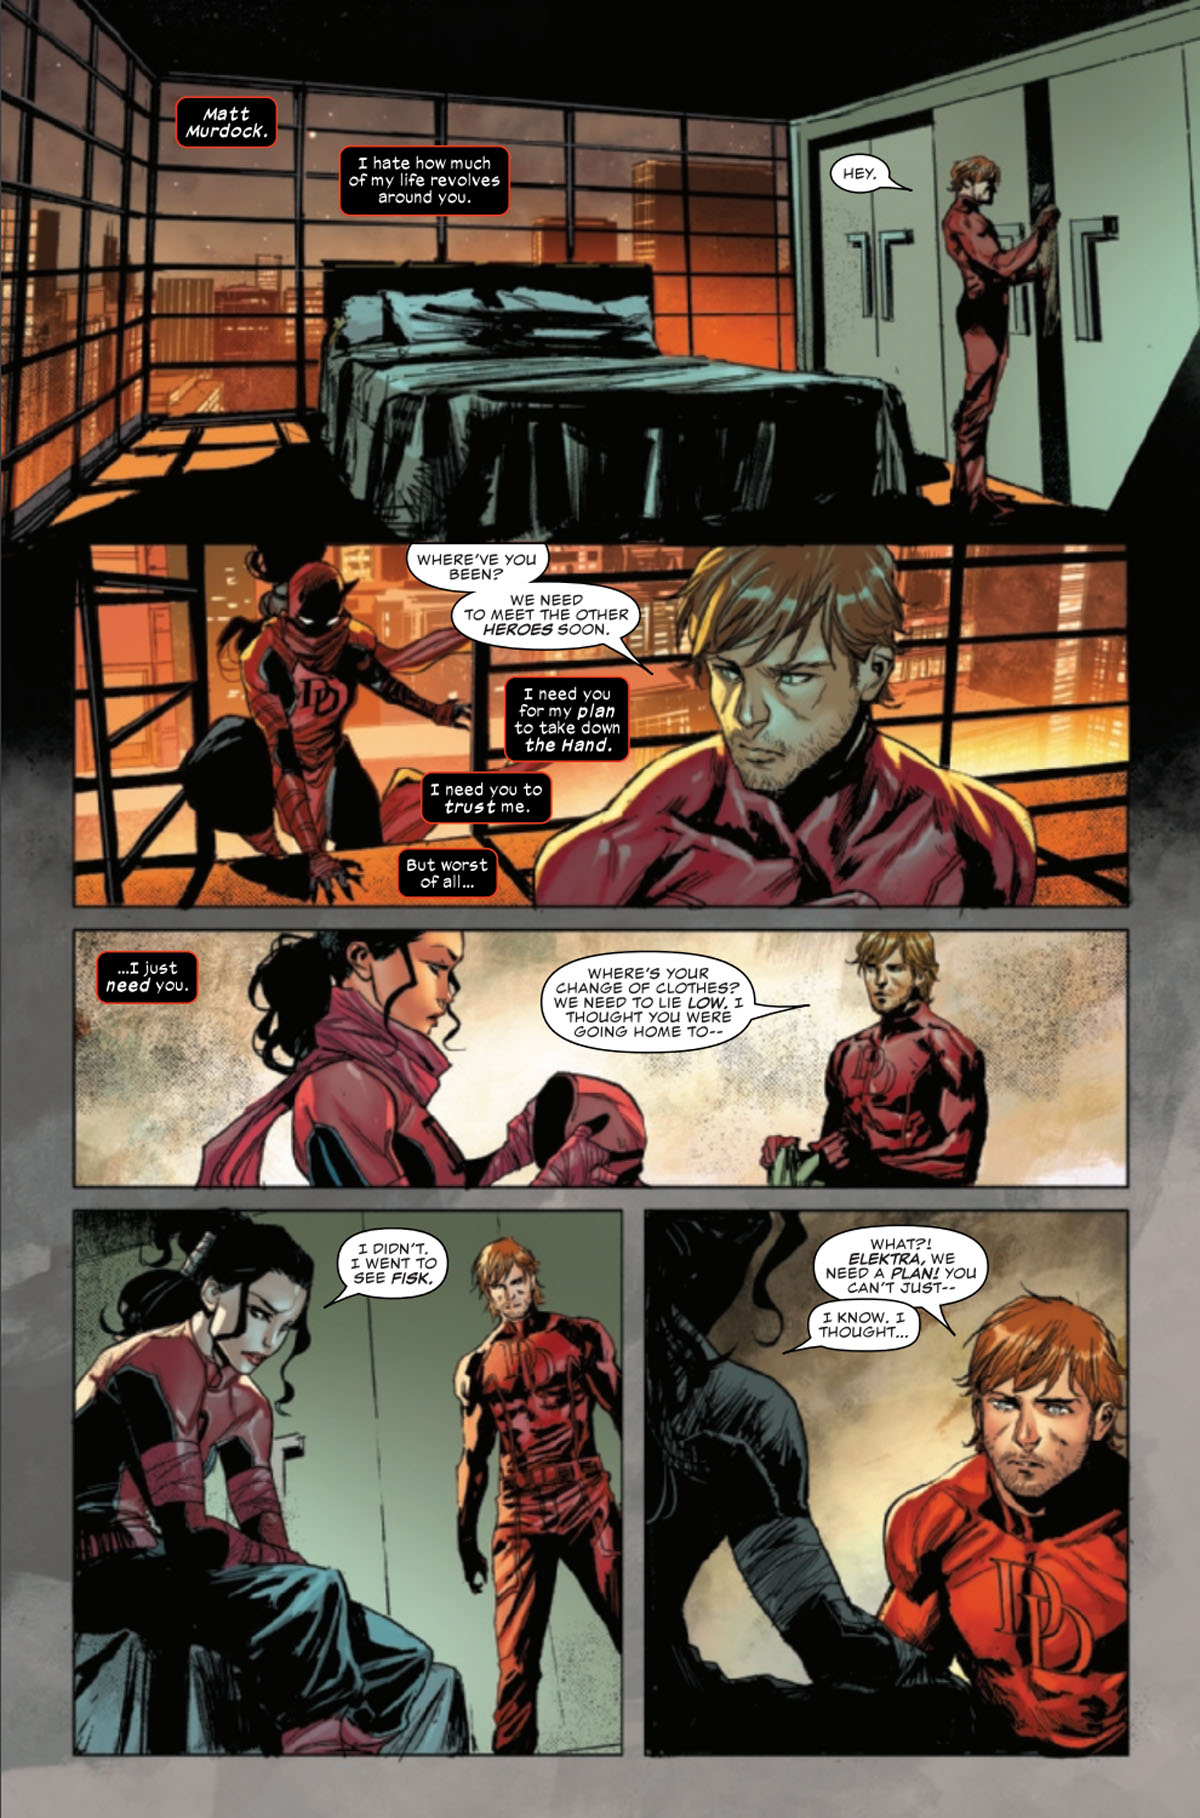 Daredevil: Woman Without Fear #1 page 3